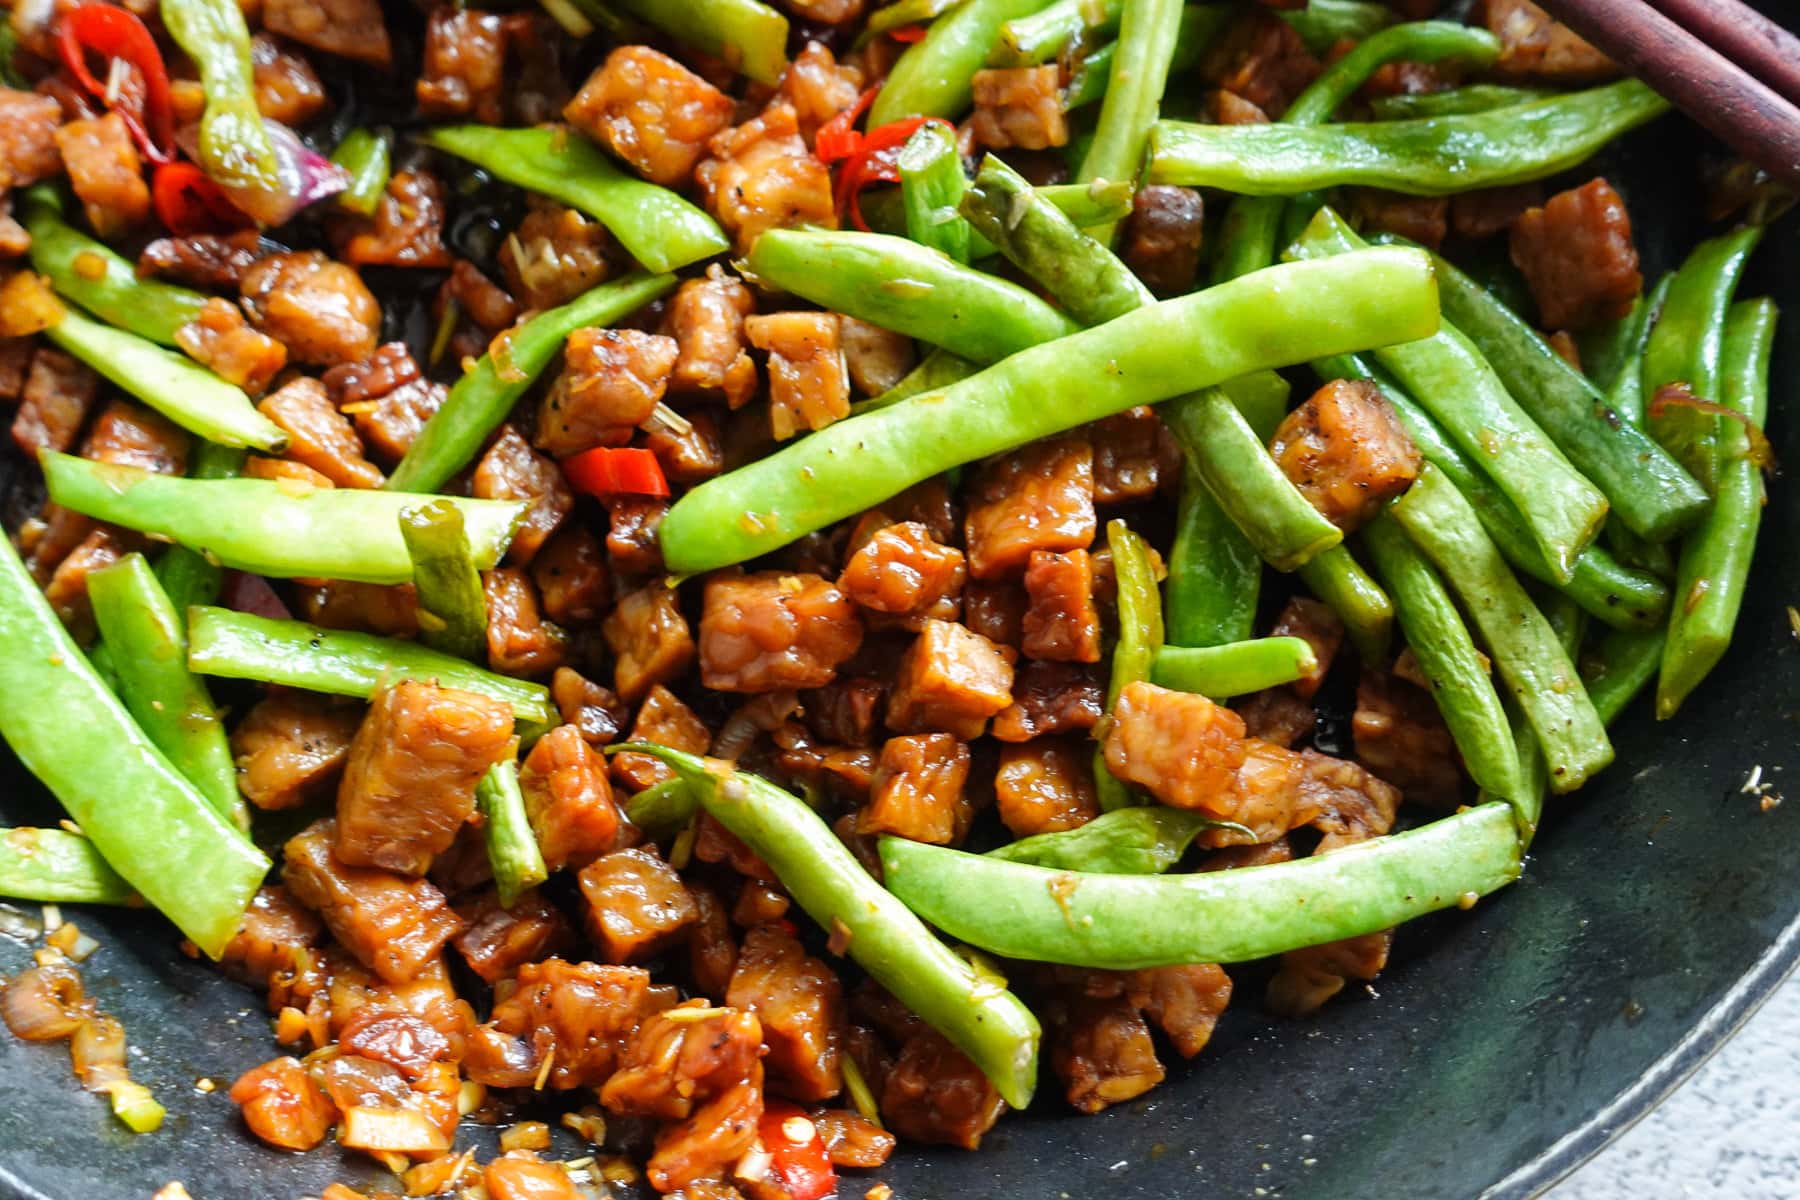 Stir fry the aromatics with green beans and aromatics